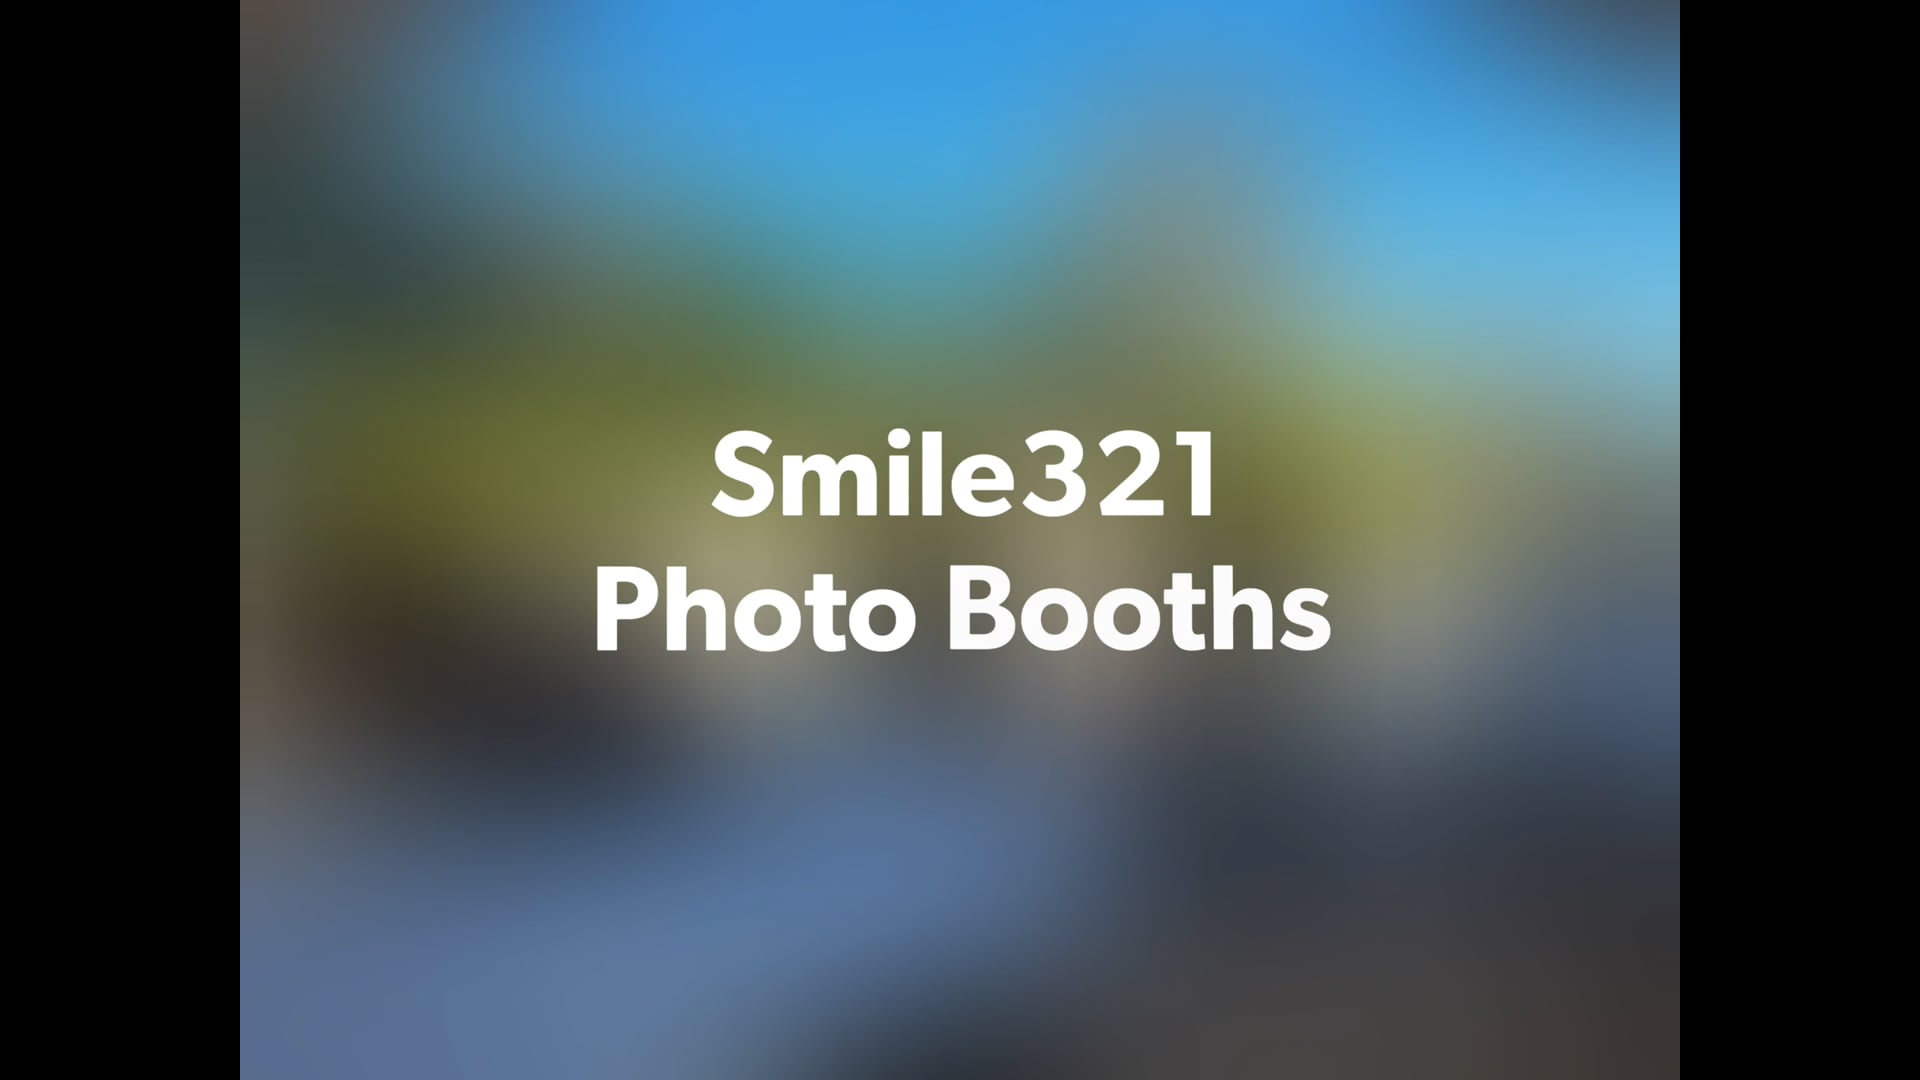 Promotional video thumbnail 1 for Smile321 Photo Booths